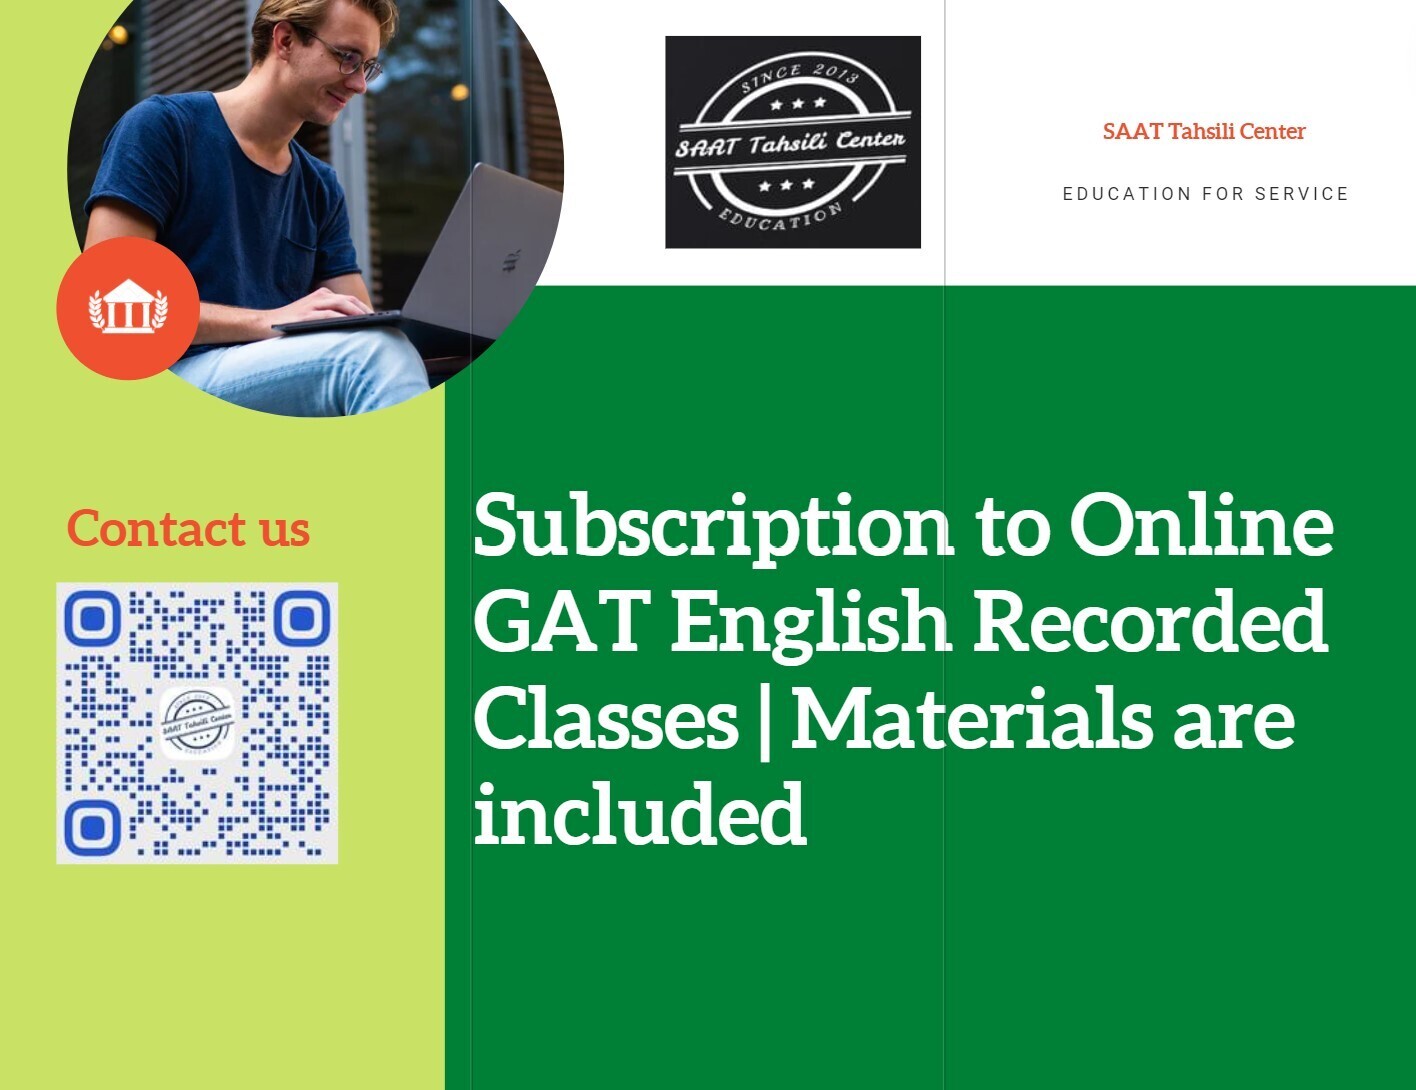 Subscription to Online GAT English Recorded Classes | Materials are included